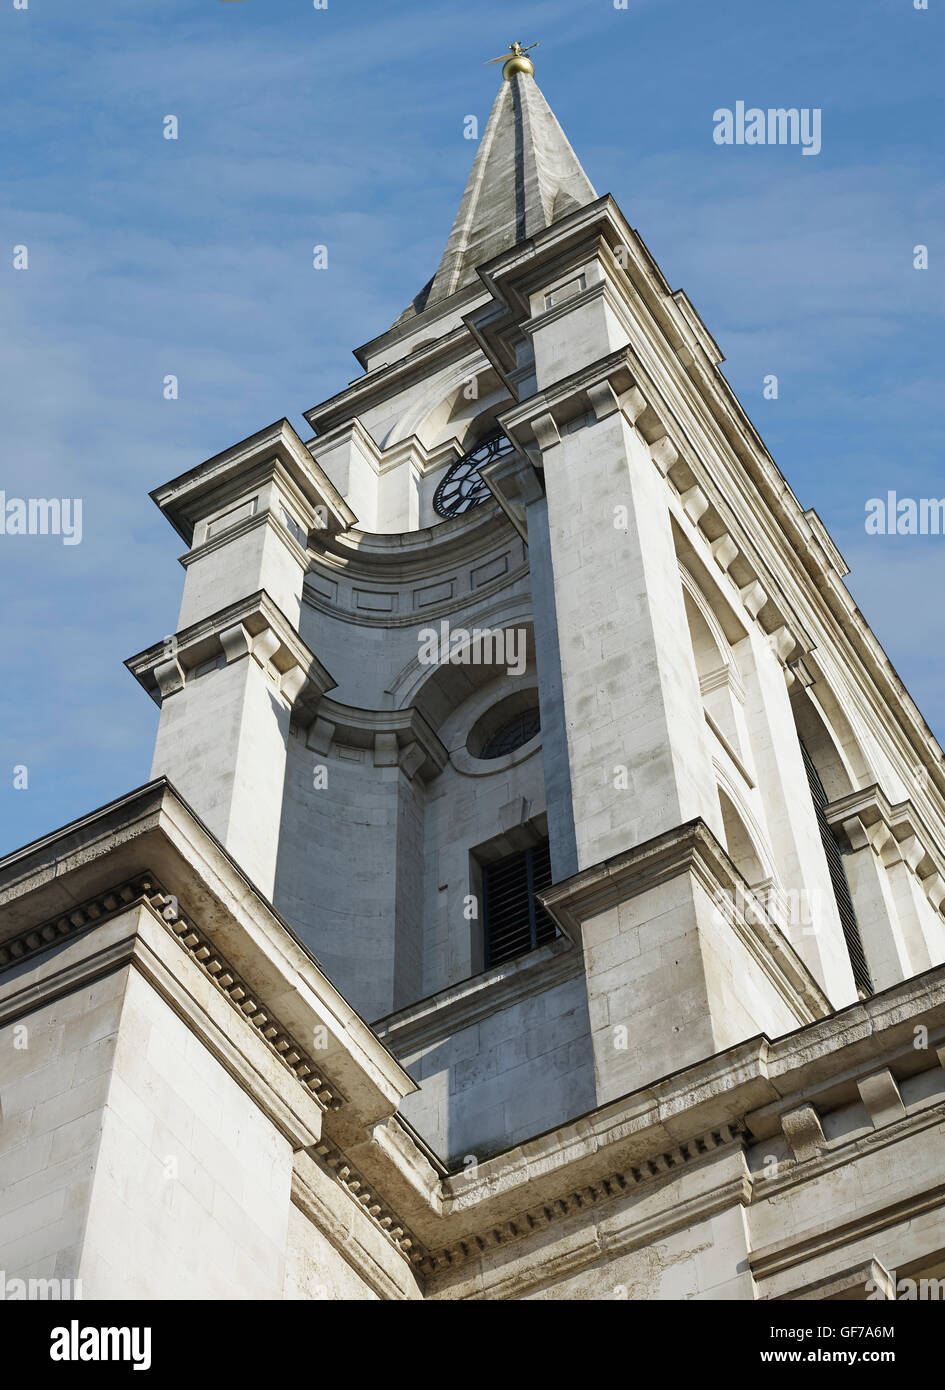 Christ Church Spitalfields tower from north, looking up Stock Photo